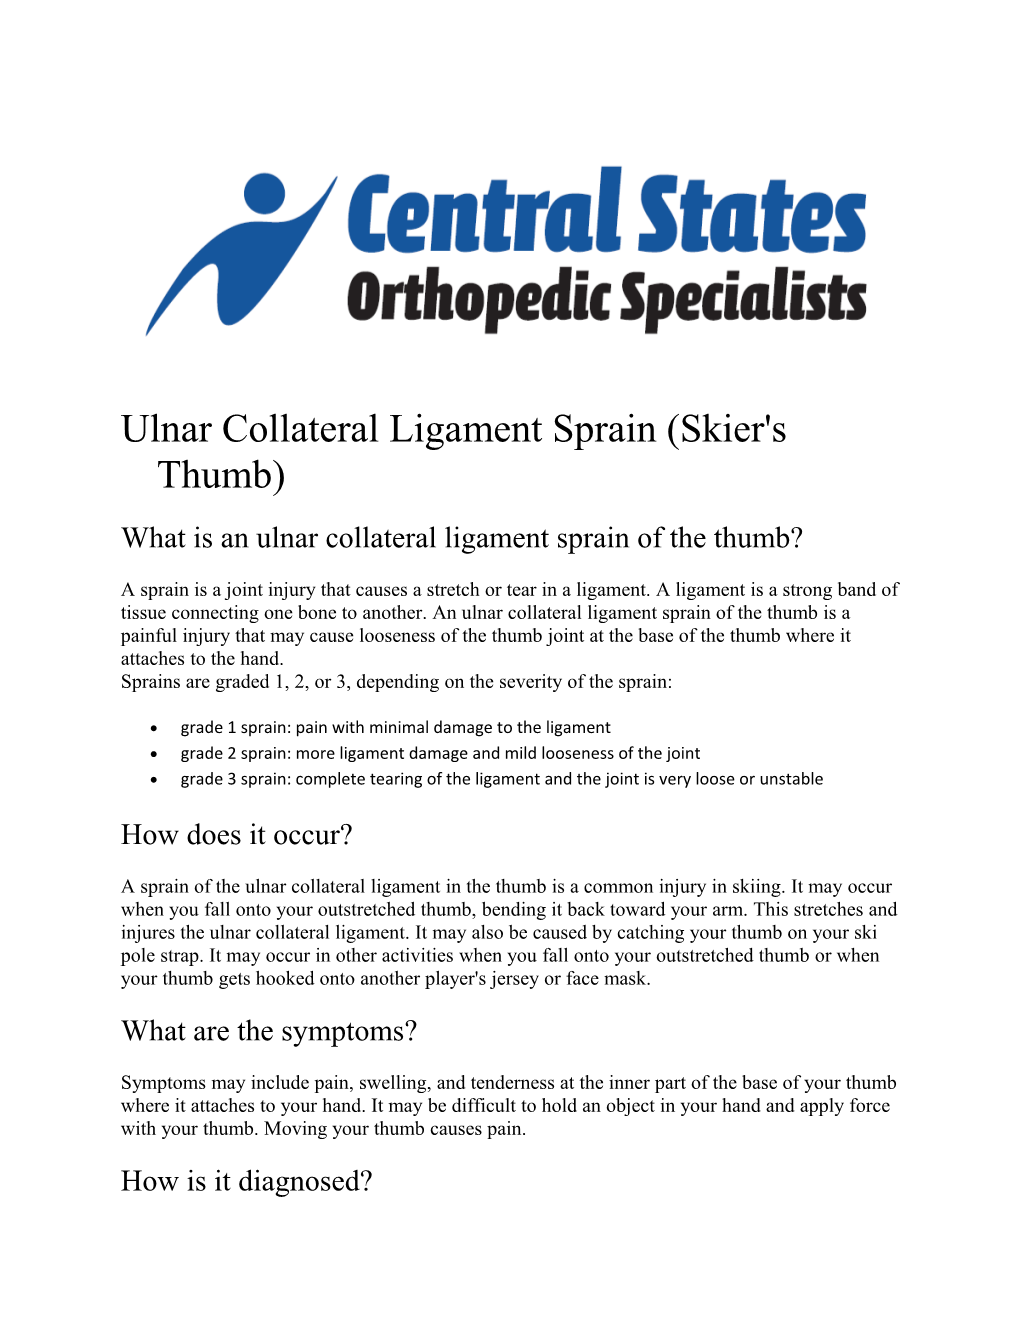 Ulnar Collateral Ligament Sprain (Skier's Thumb)